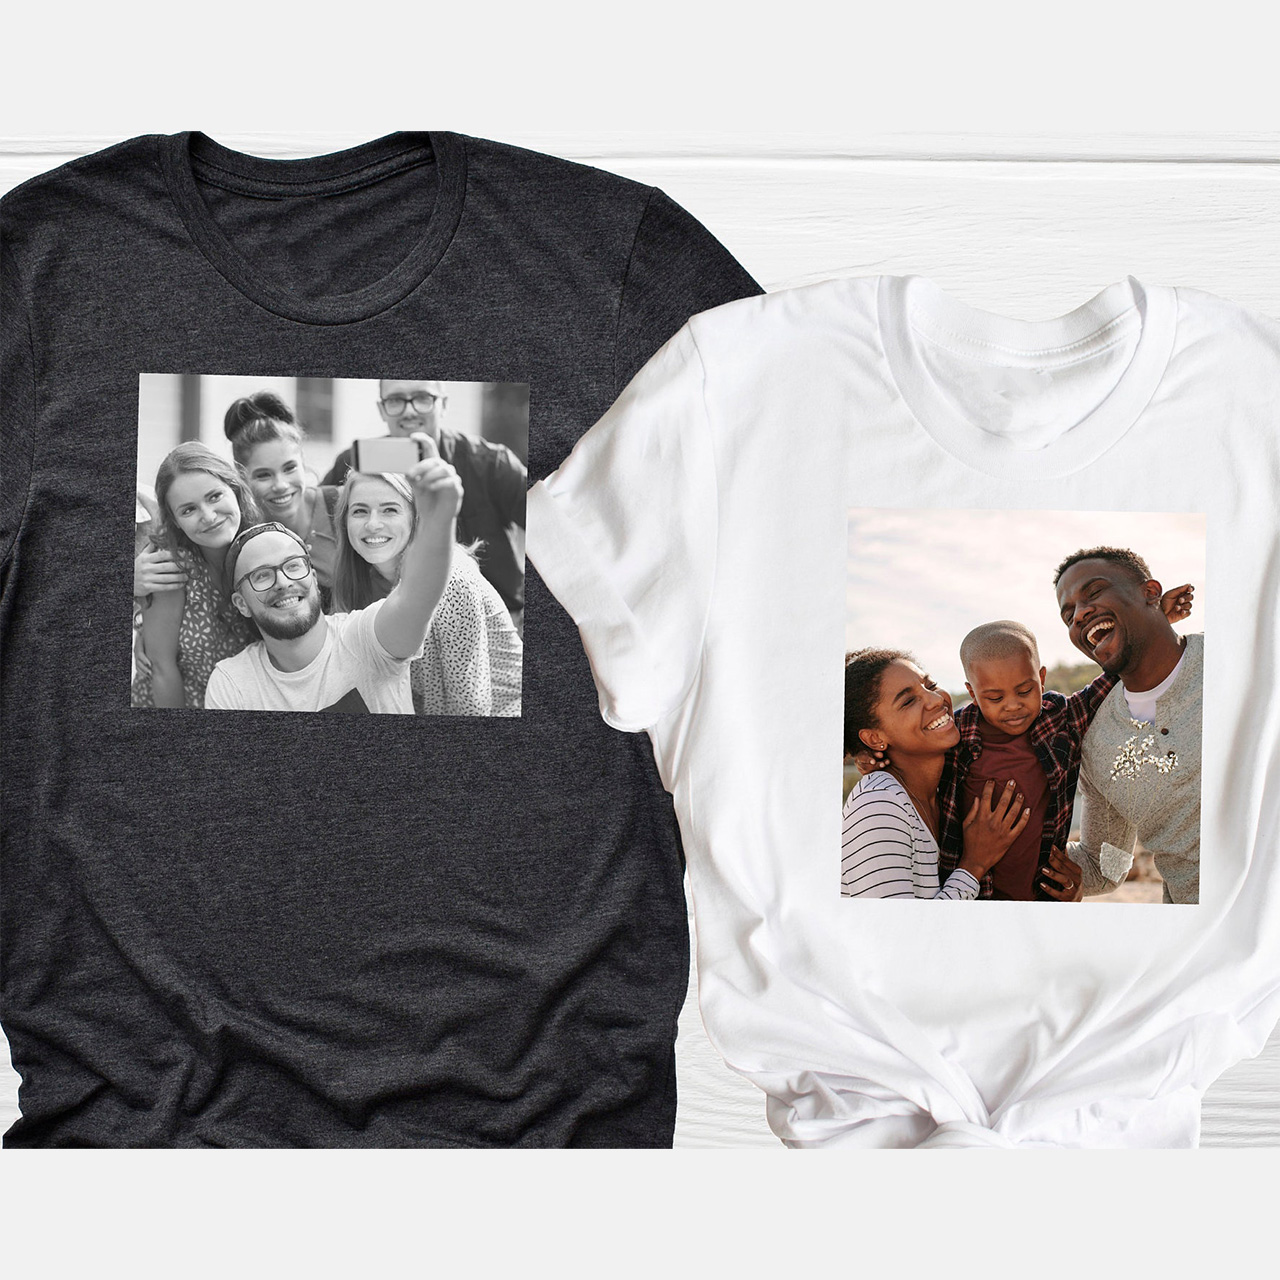 Personalized Family Shirt-Make Your Own Shirt